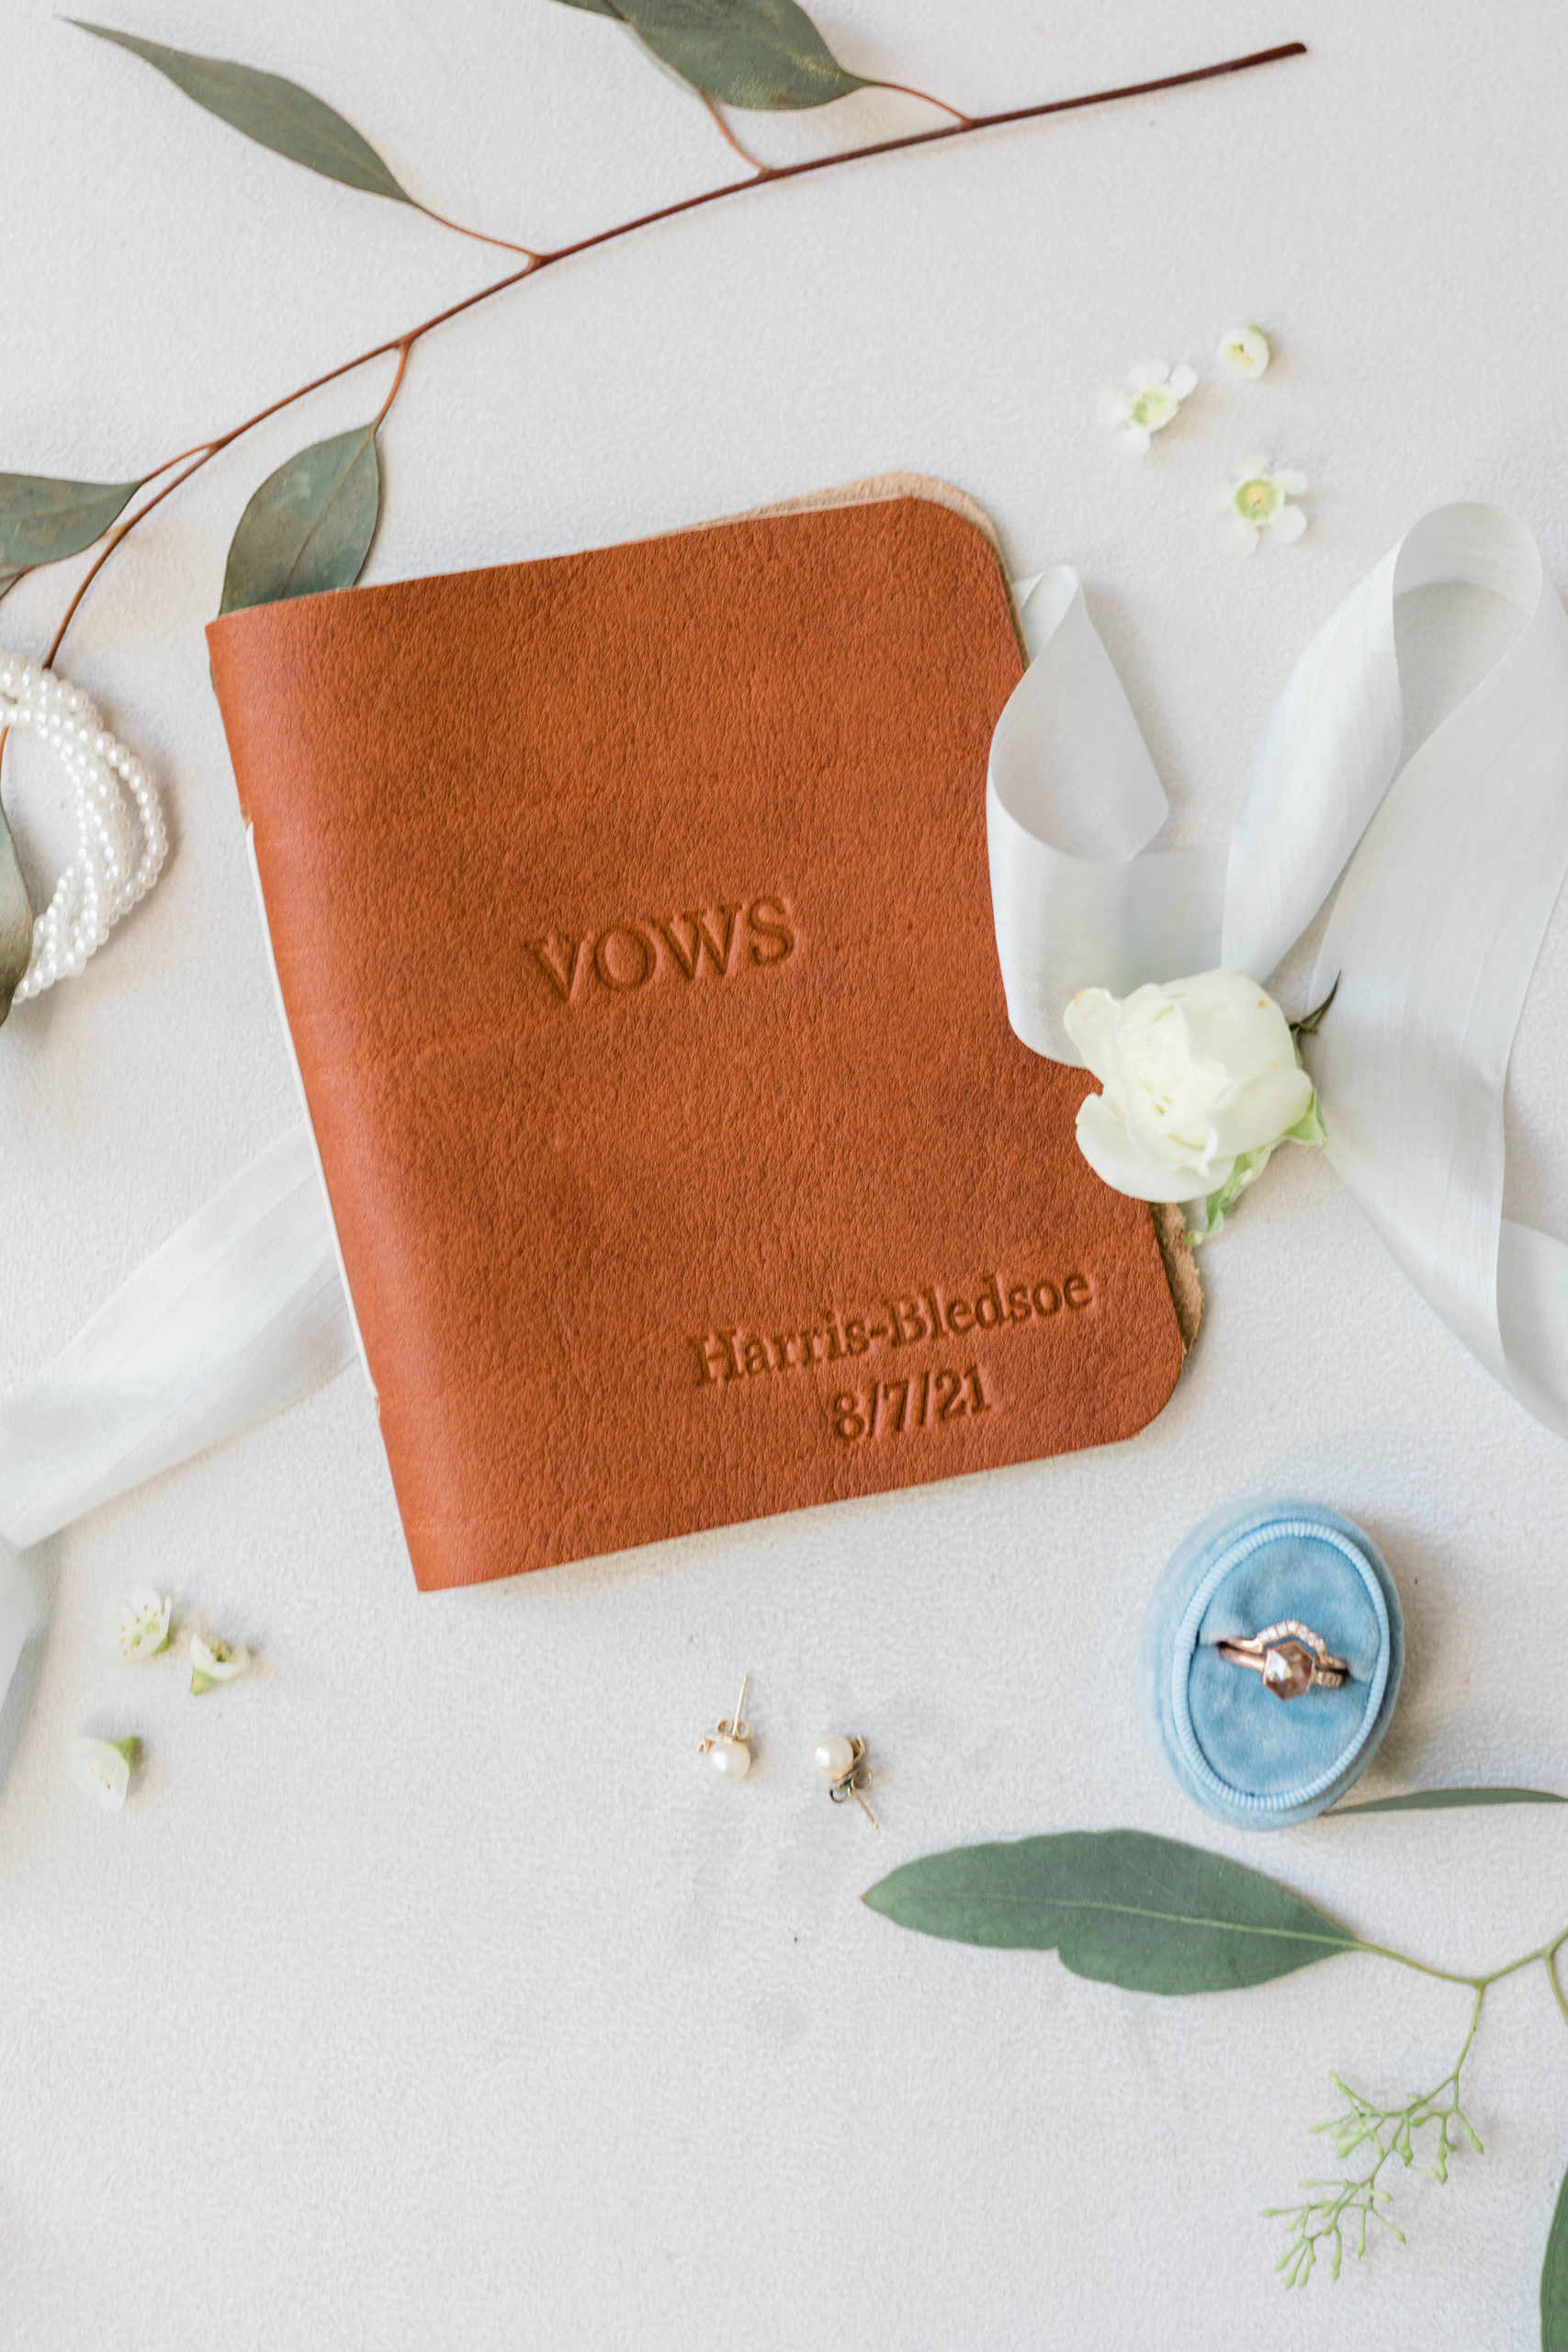 light brown leather vow book with florals surrounding it